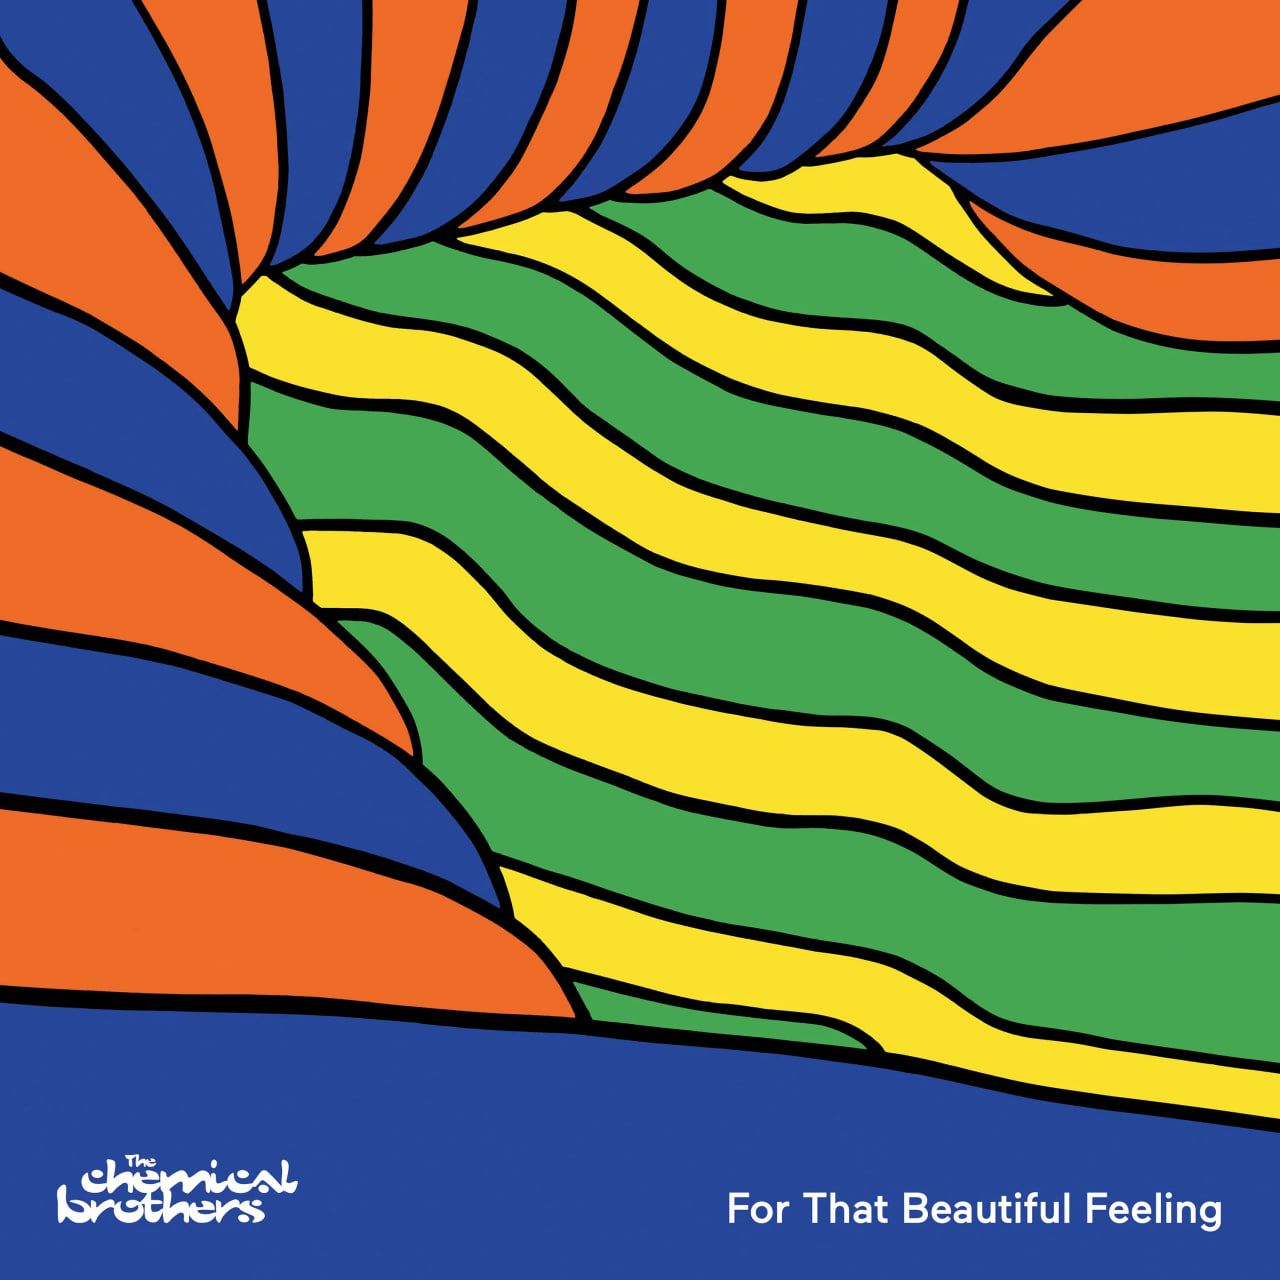 Электроника Virgin The Chemical Brothers - For That Beautiful Feeling (Black Vinyl 2LP) металл bmg bruce dickinson the chemical wedding limited edition 180 gram coloured vinyl 2lp